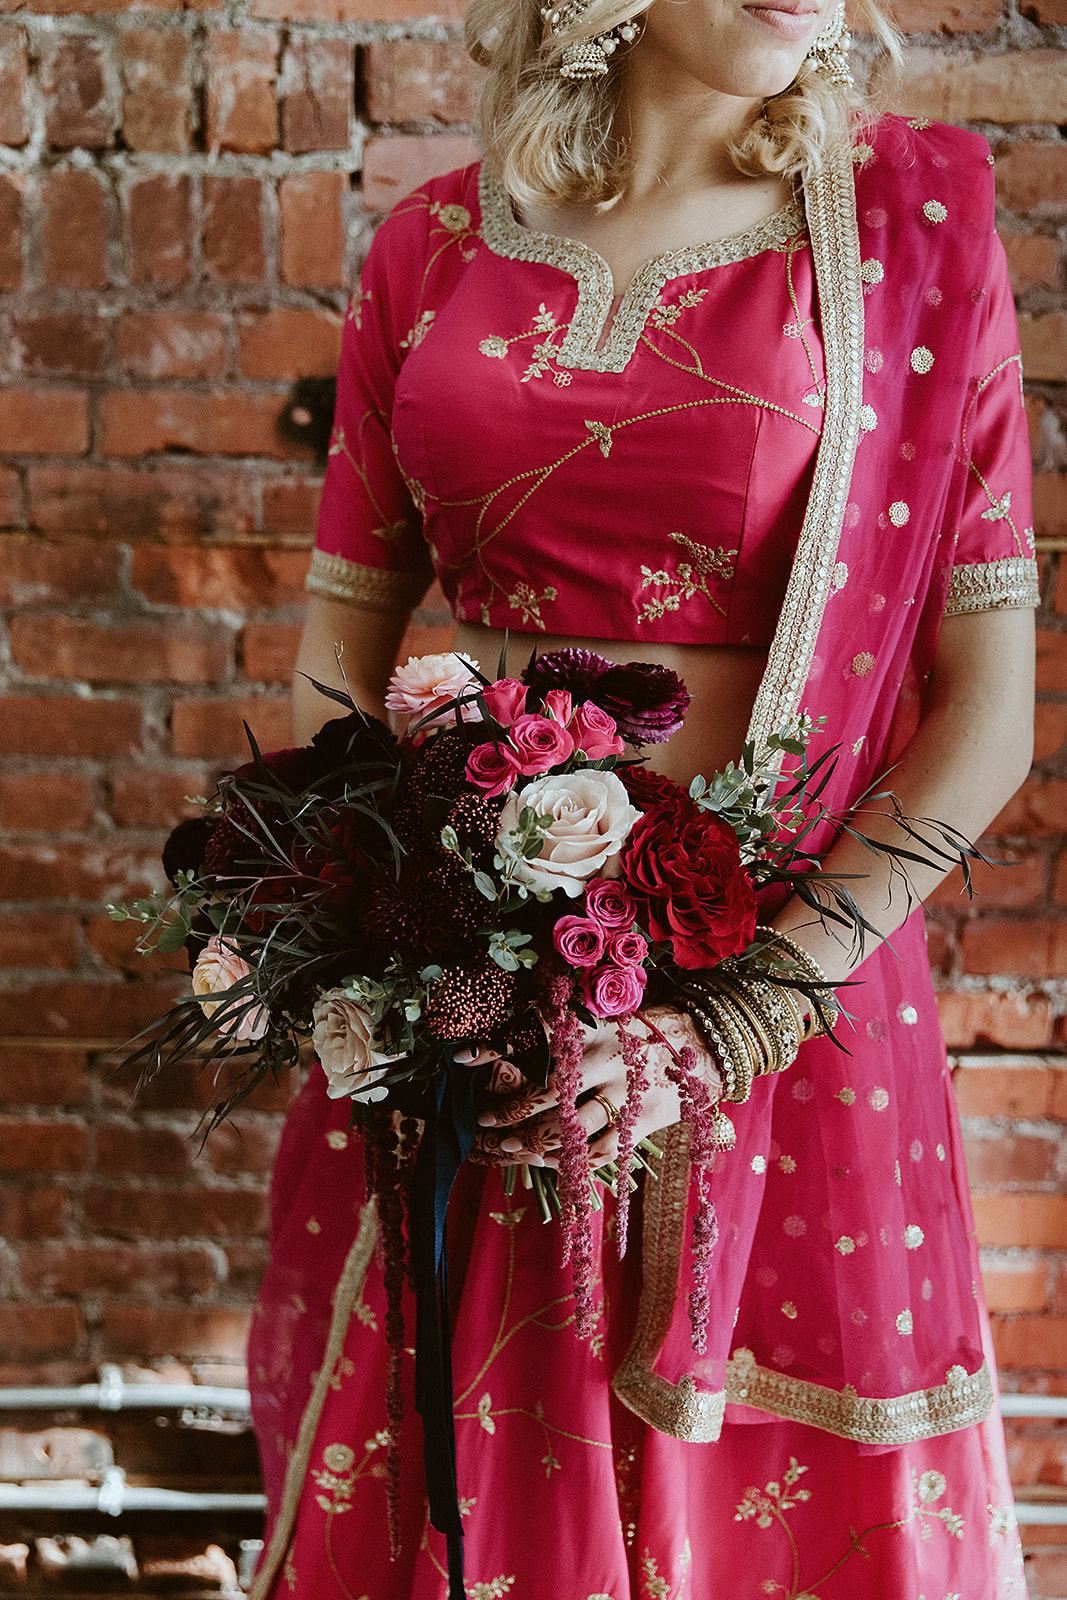 Bride in a bright pink lehenga holds a jewel tone inspired bridal bouquet